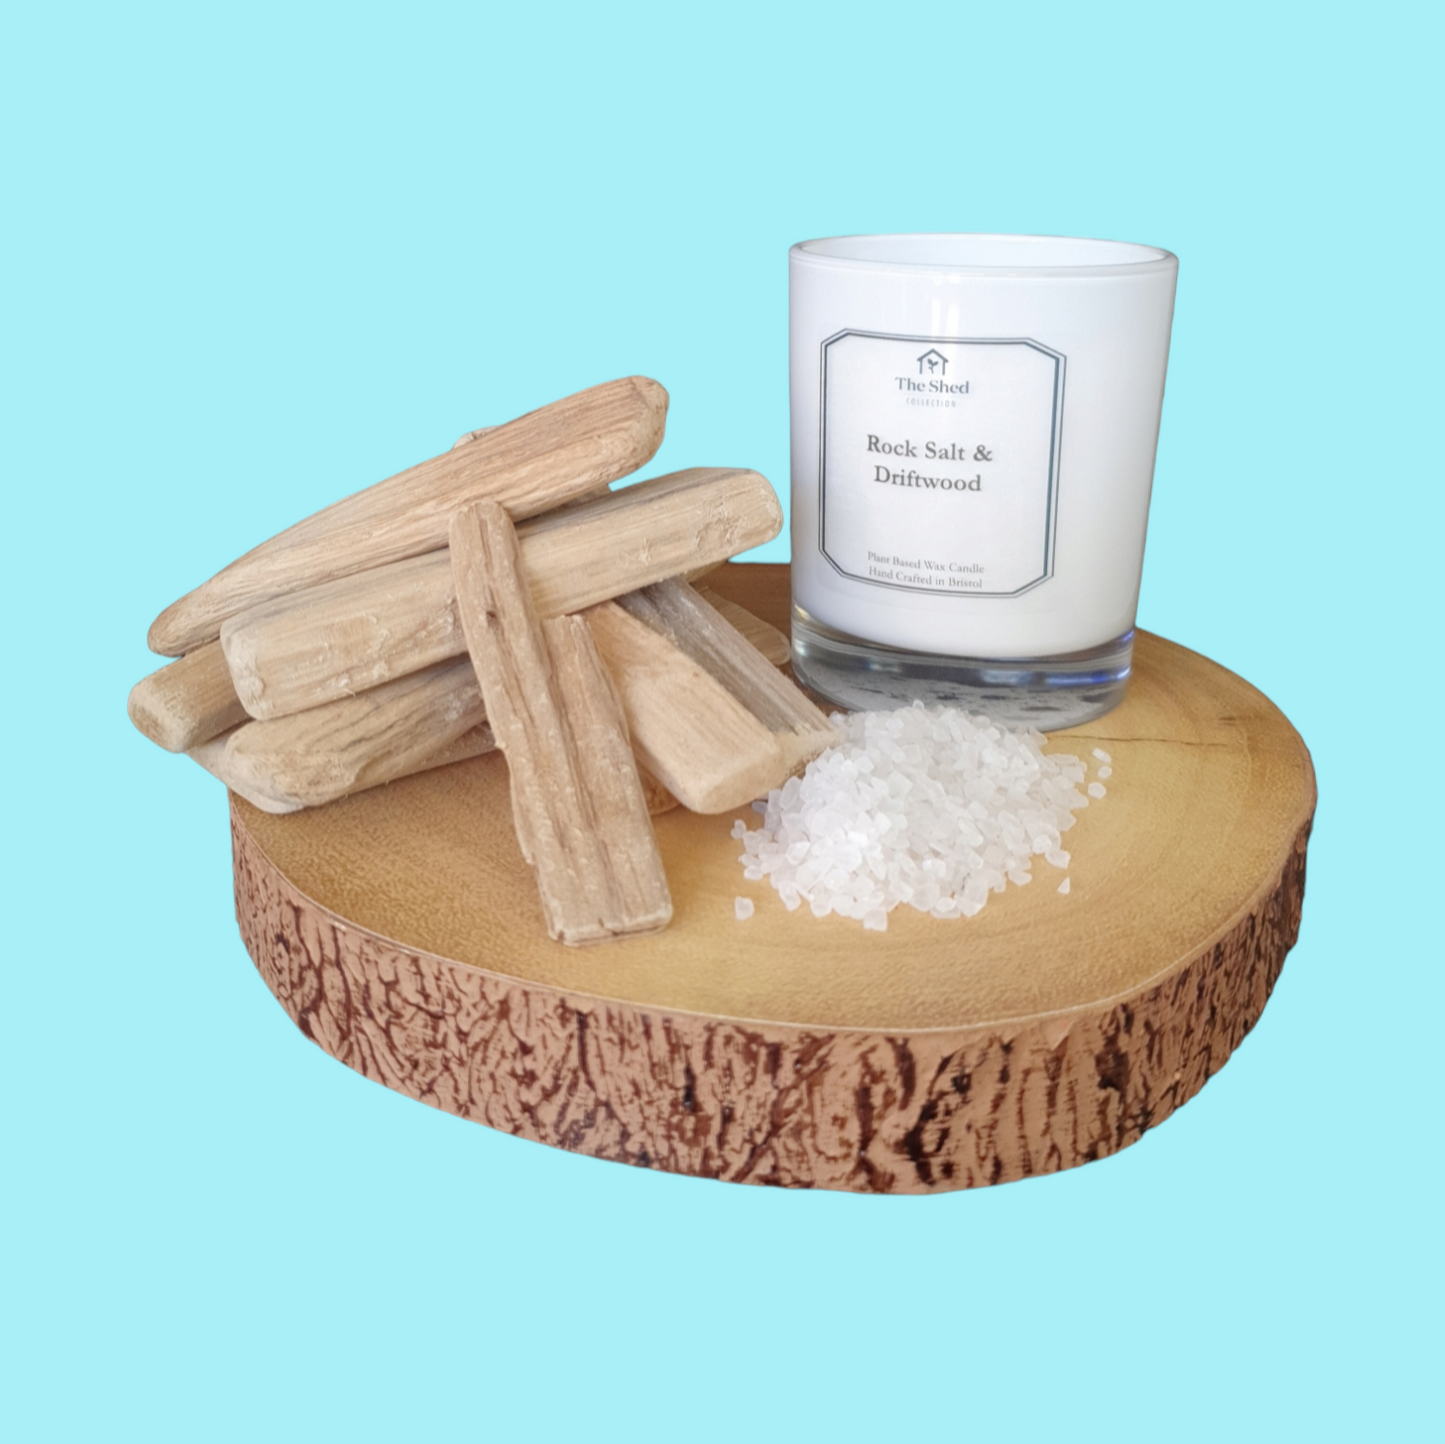 Rock Salt & Driftwood Hand Crafted Candle (200g)